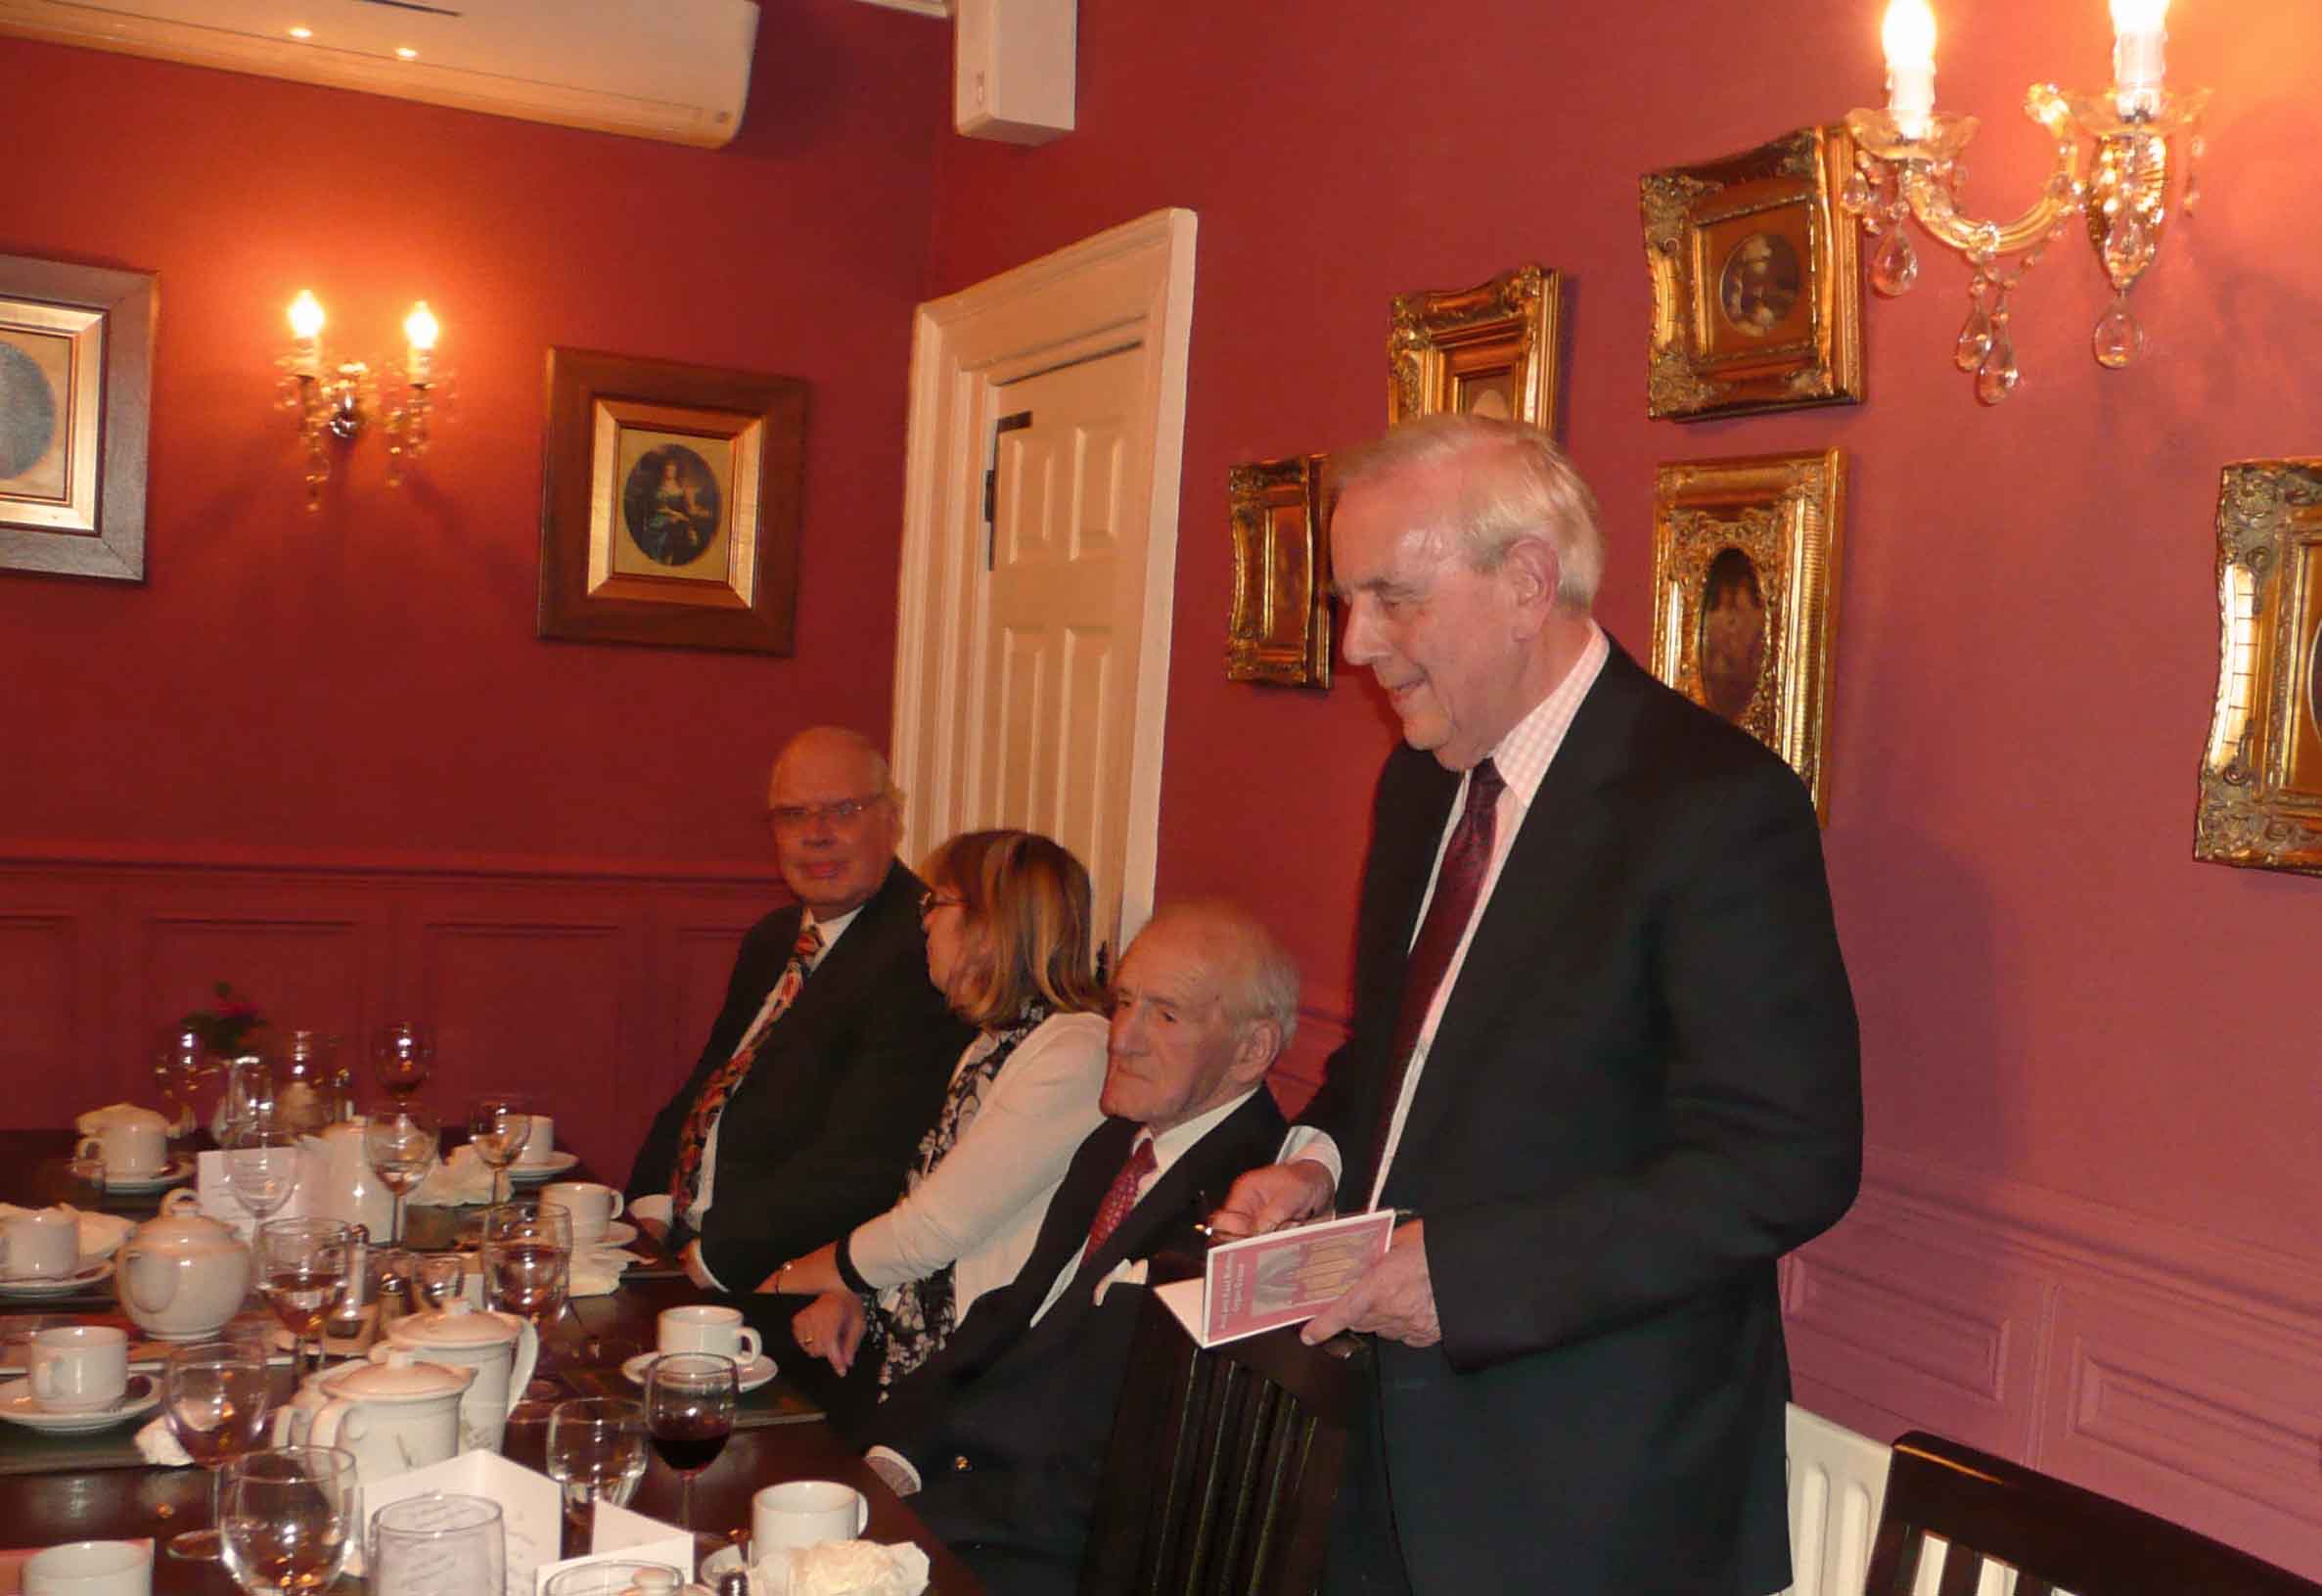 Alan Spedding stands to introduce Dr Francis Jackson on his right as Speaker at the 1st Annual Dinner